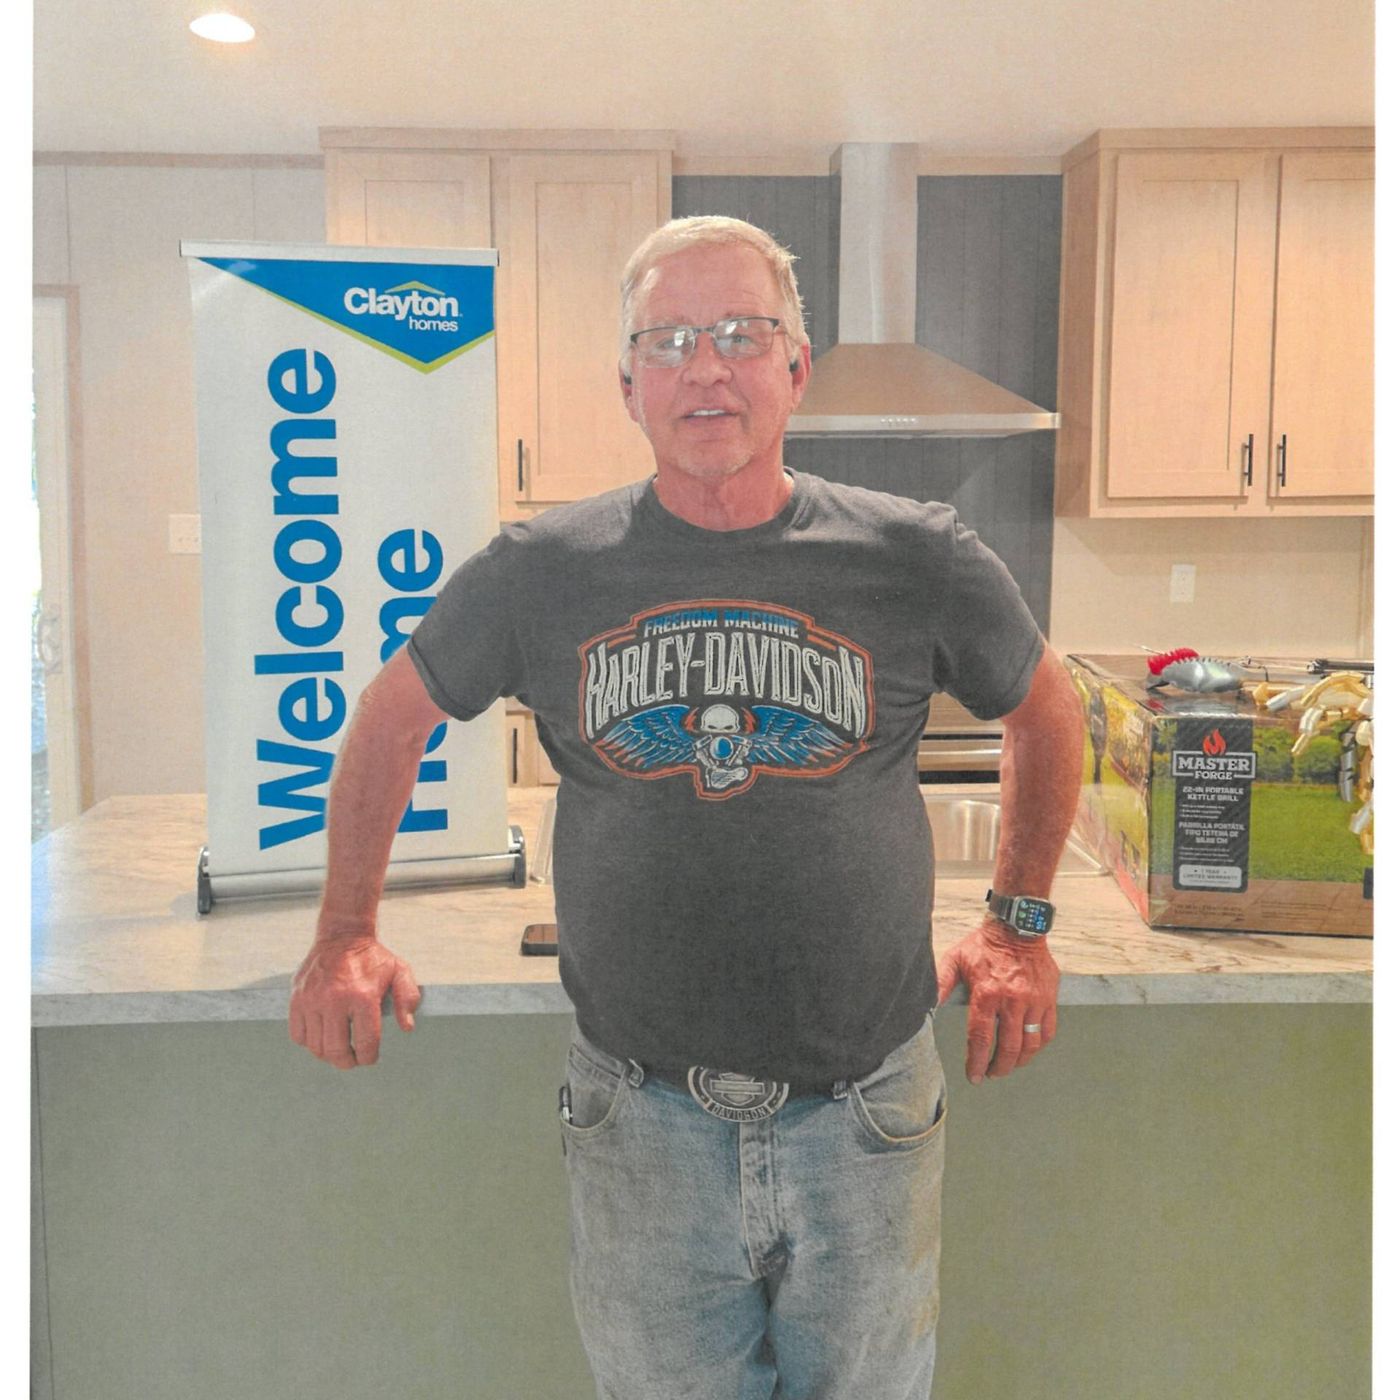 GREGORY B. welcome home image